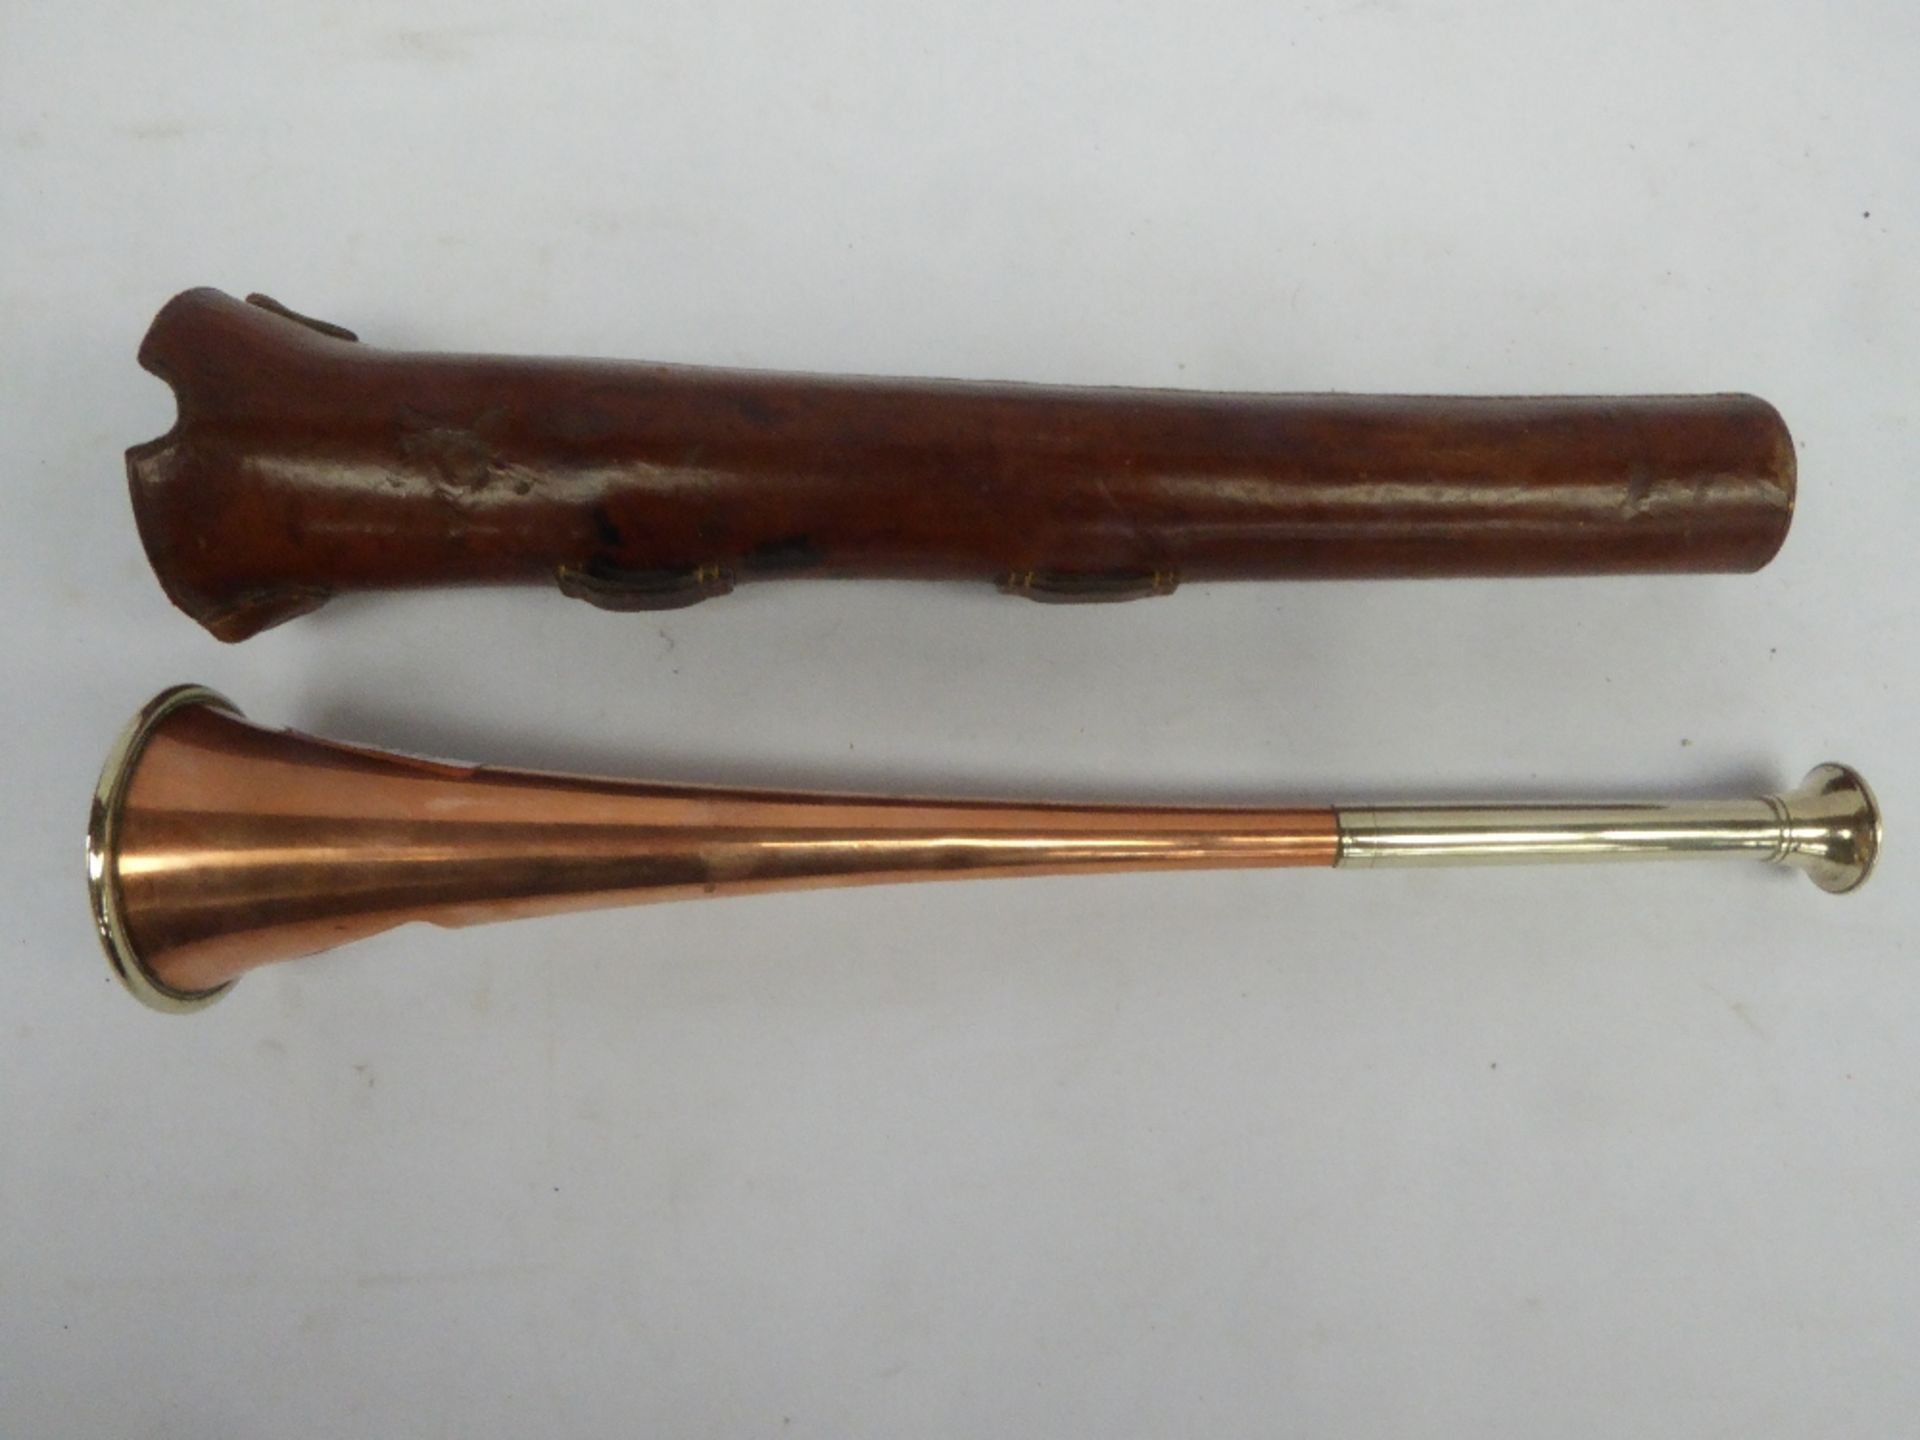 Copper hunt horn with nickel ferrule and mouthpiece, complete with leather case